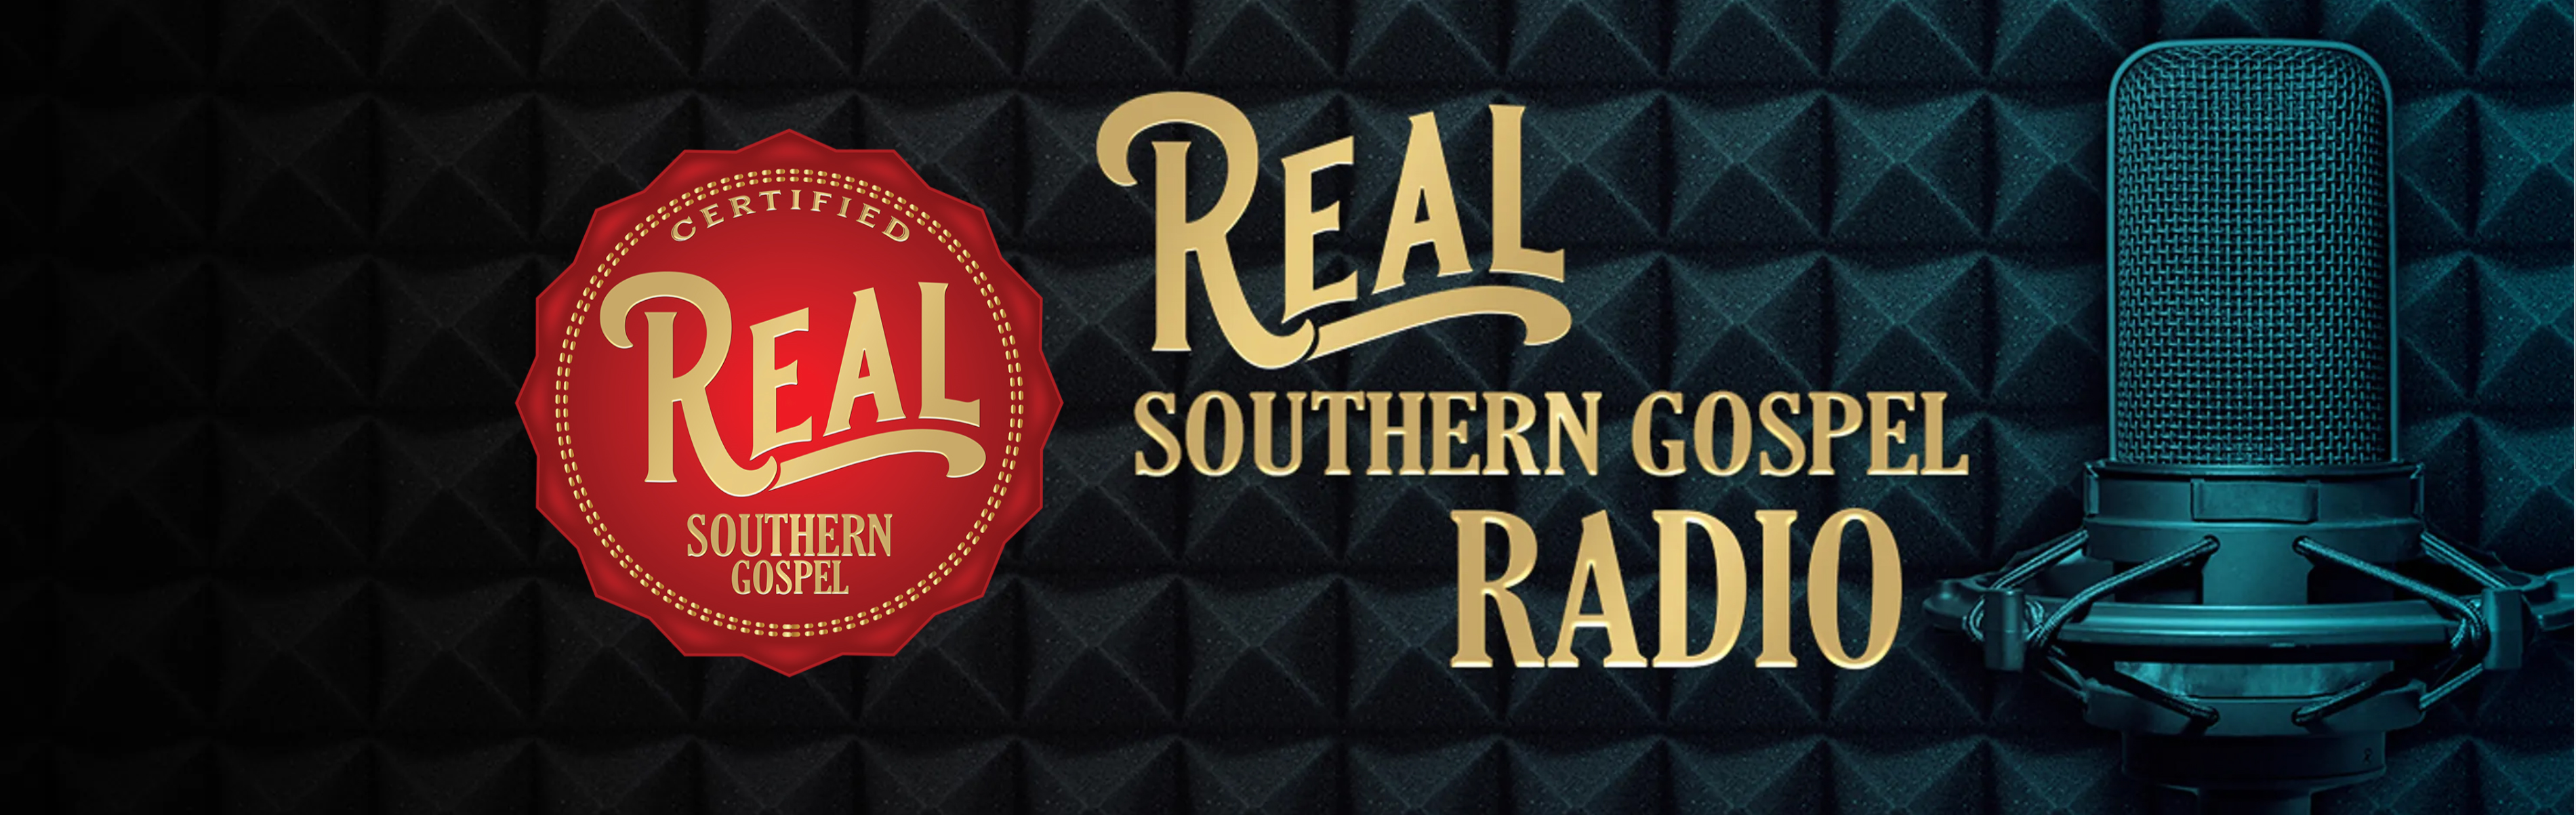 Rated R.. R E A L. - Southern Gospel Music Radio